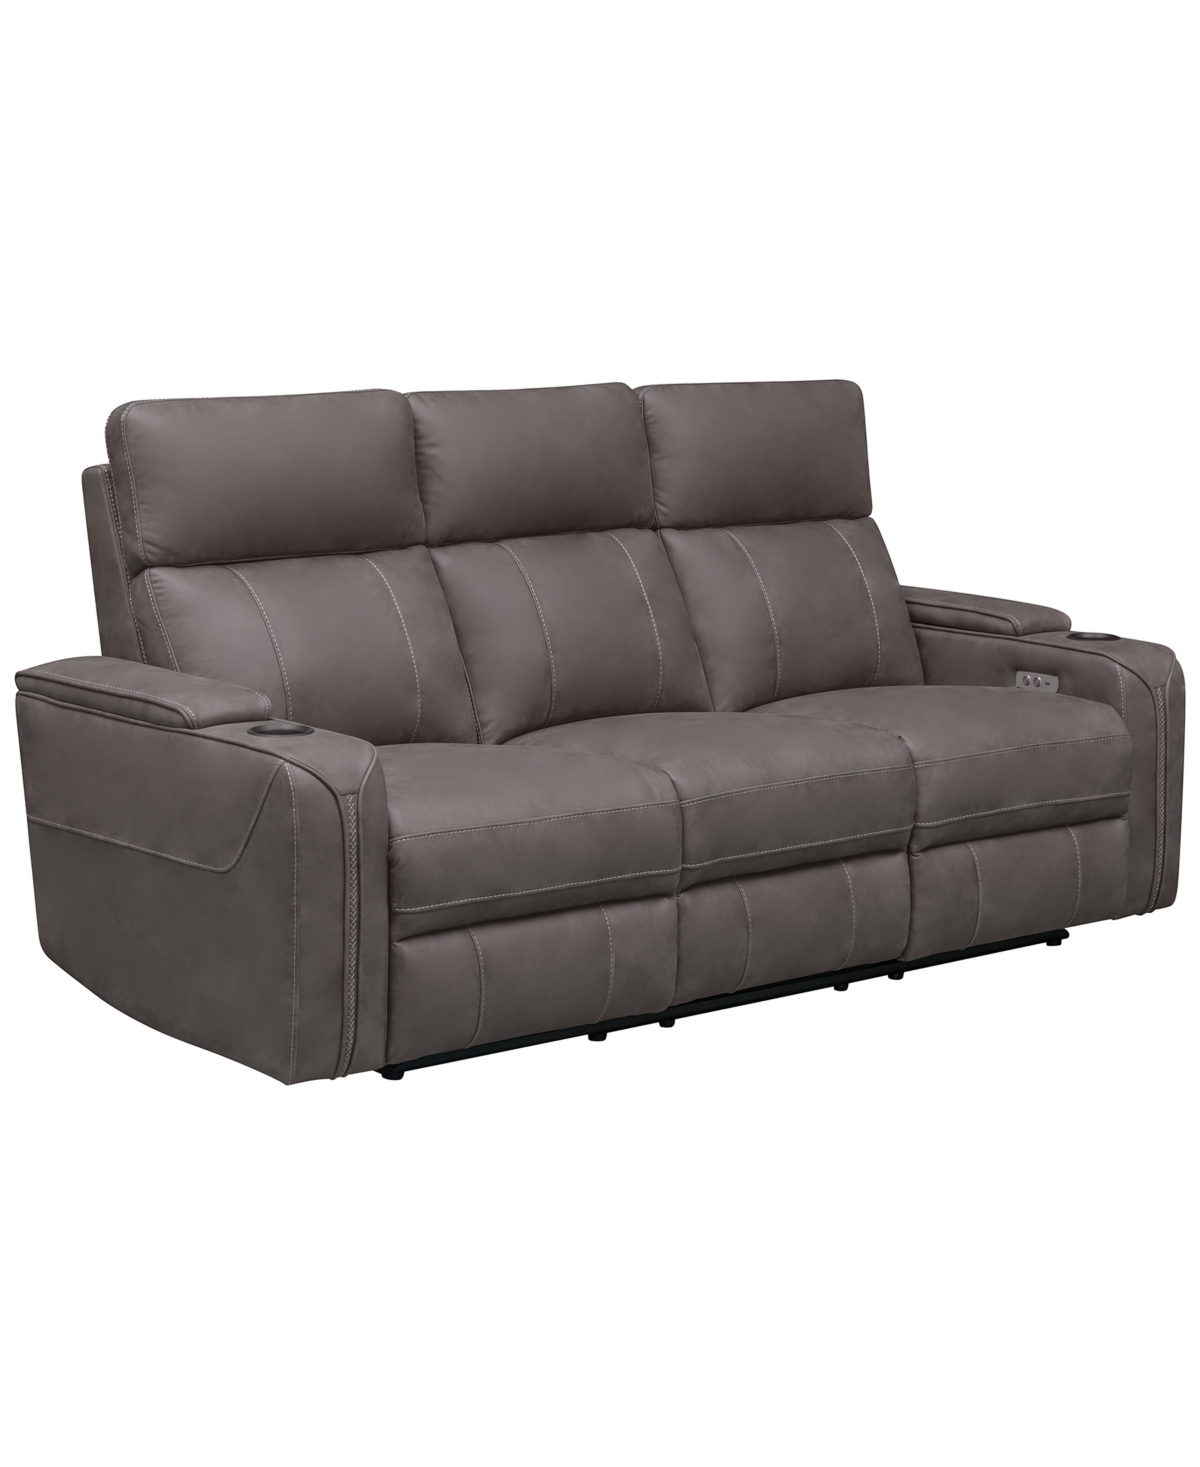 Abbyson Living Avenger 85.8" Fabric With Dropdown Table Power Reclining Sofa In Gray